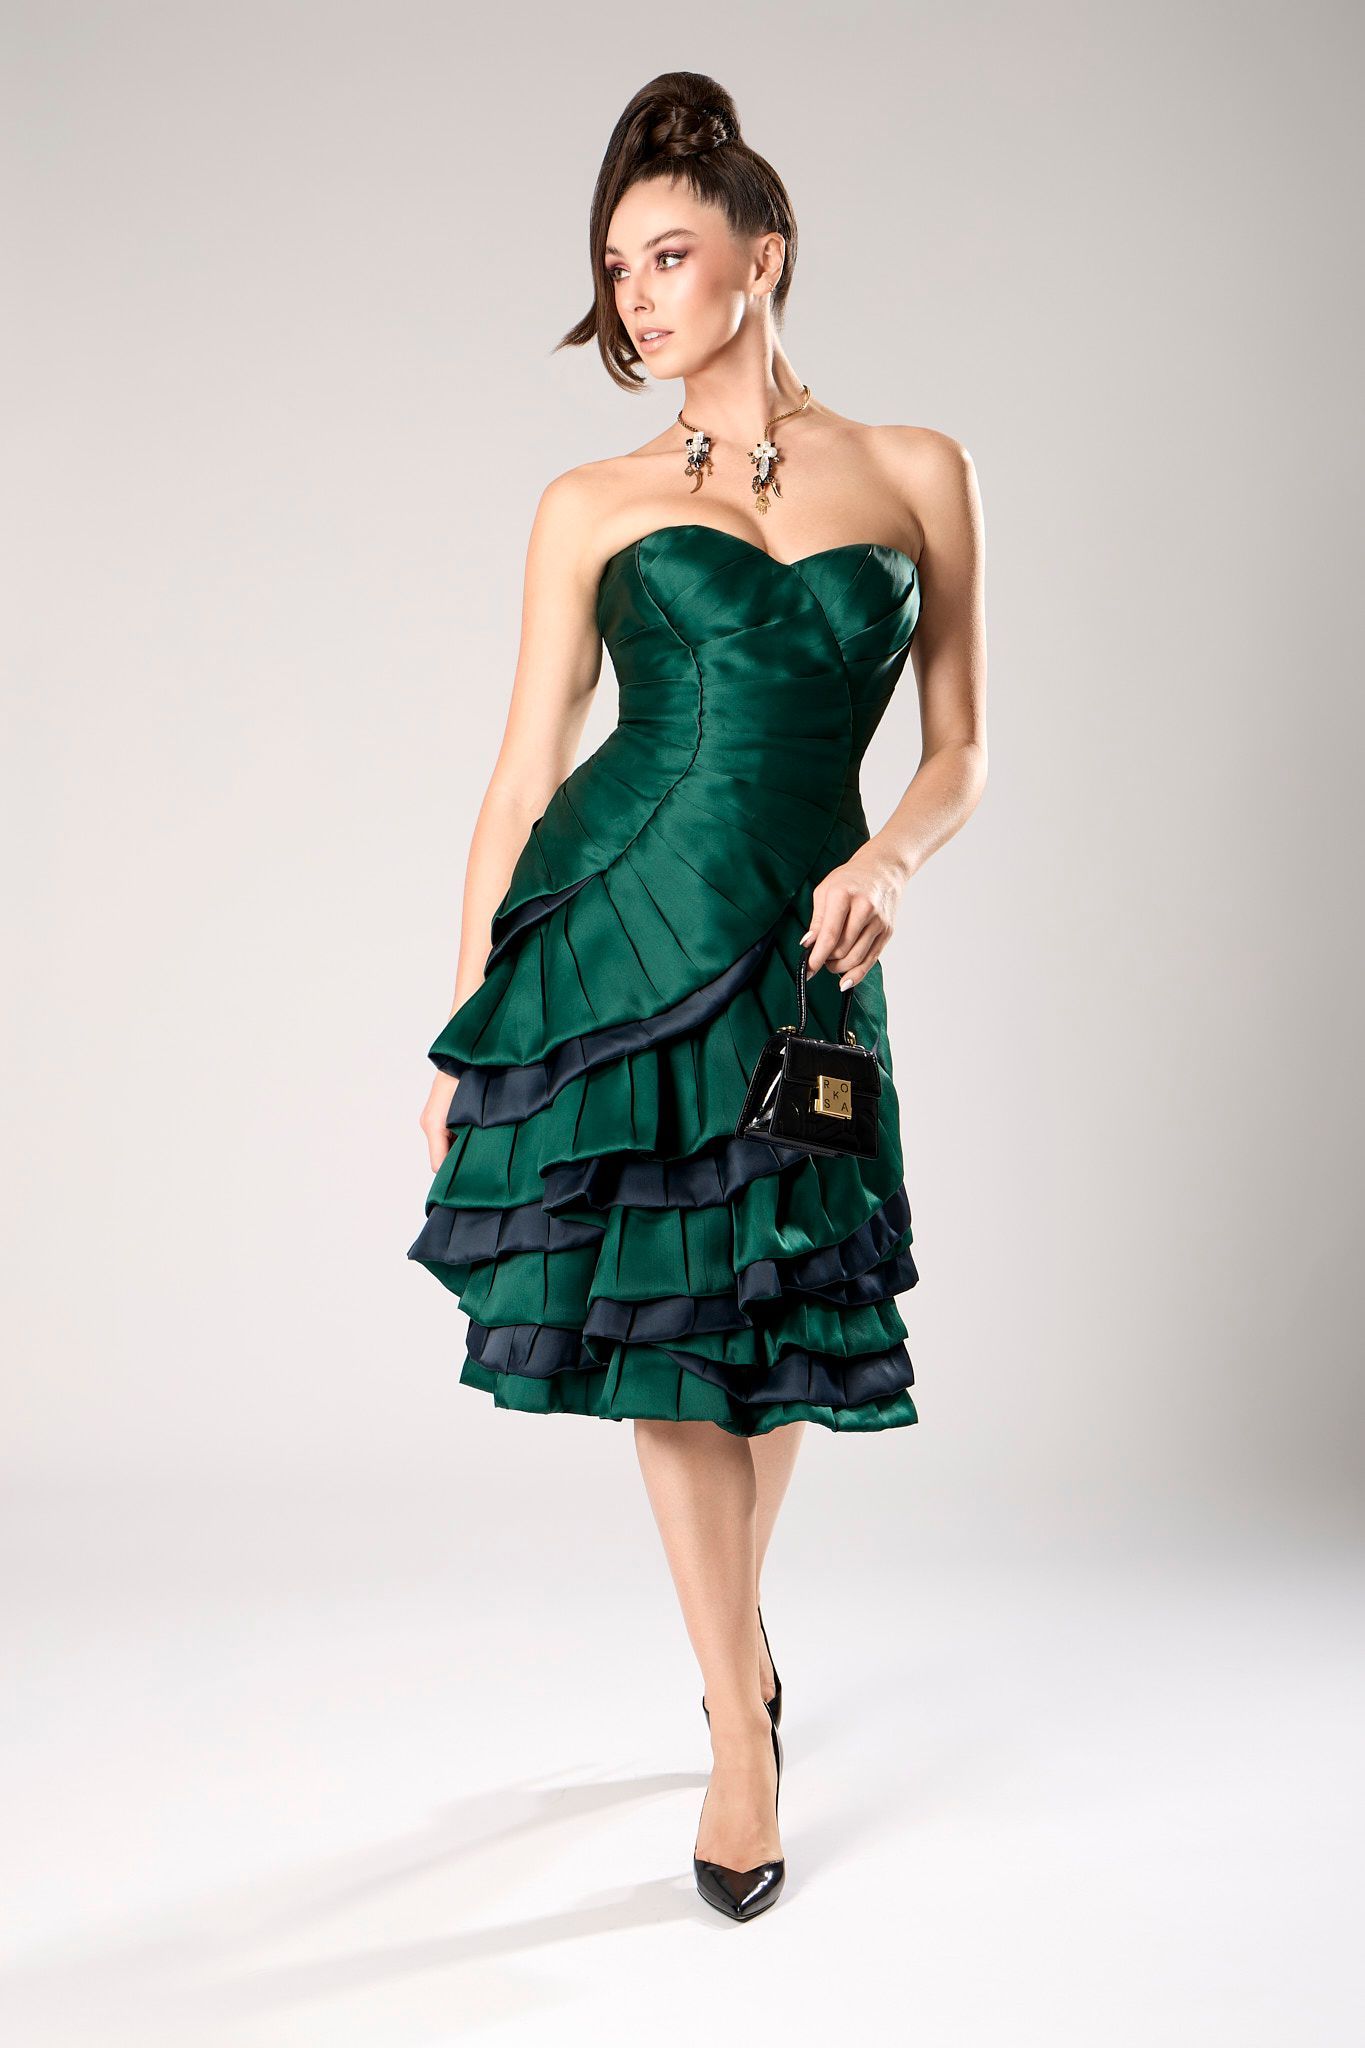 International top model wearing a elegant green strapless  gown for NY Fashion week.